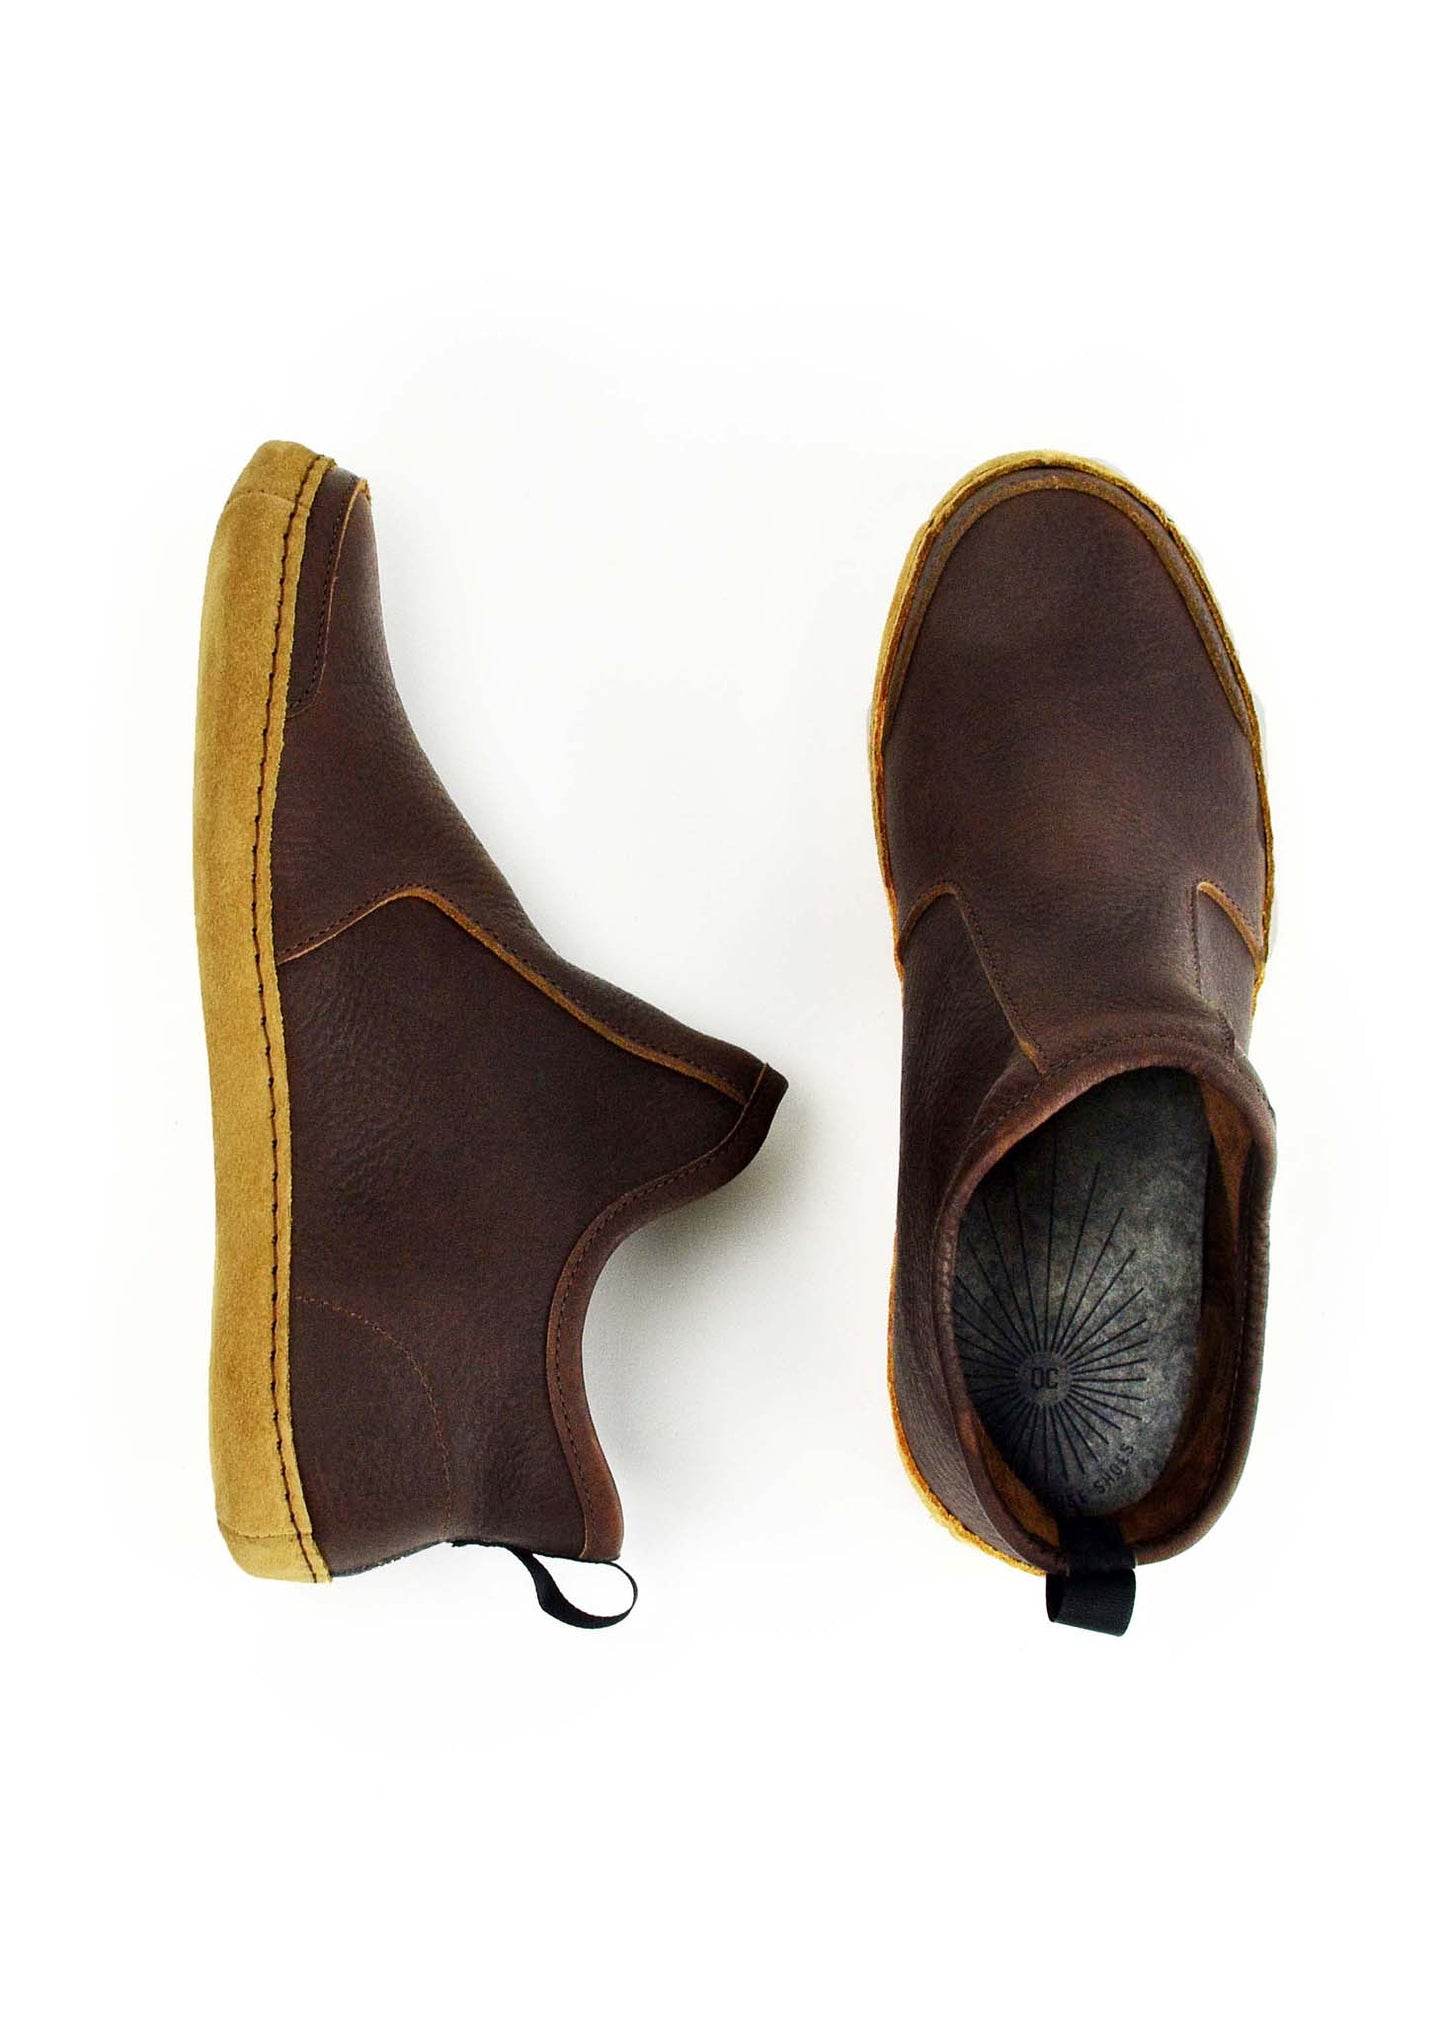 Vermont House Shoes - Hi-Top - Chocolate top and side view